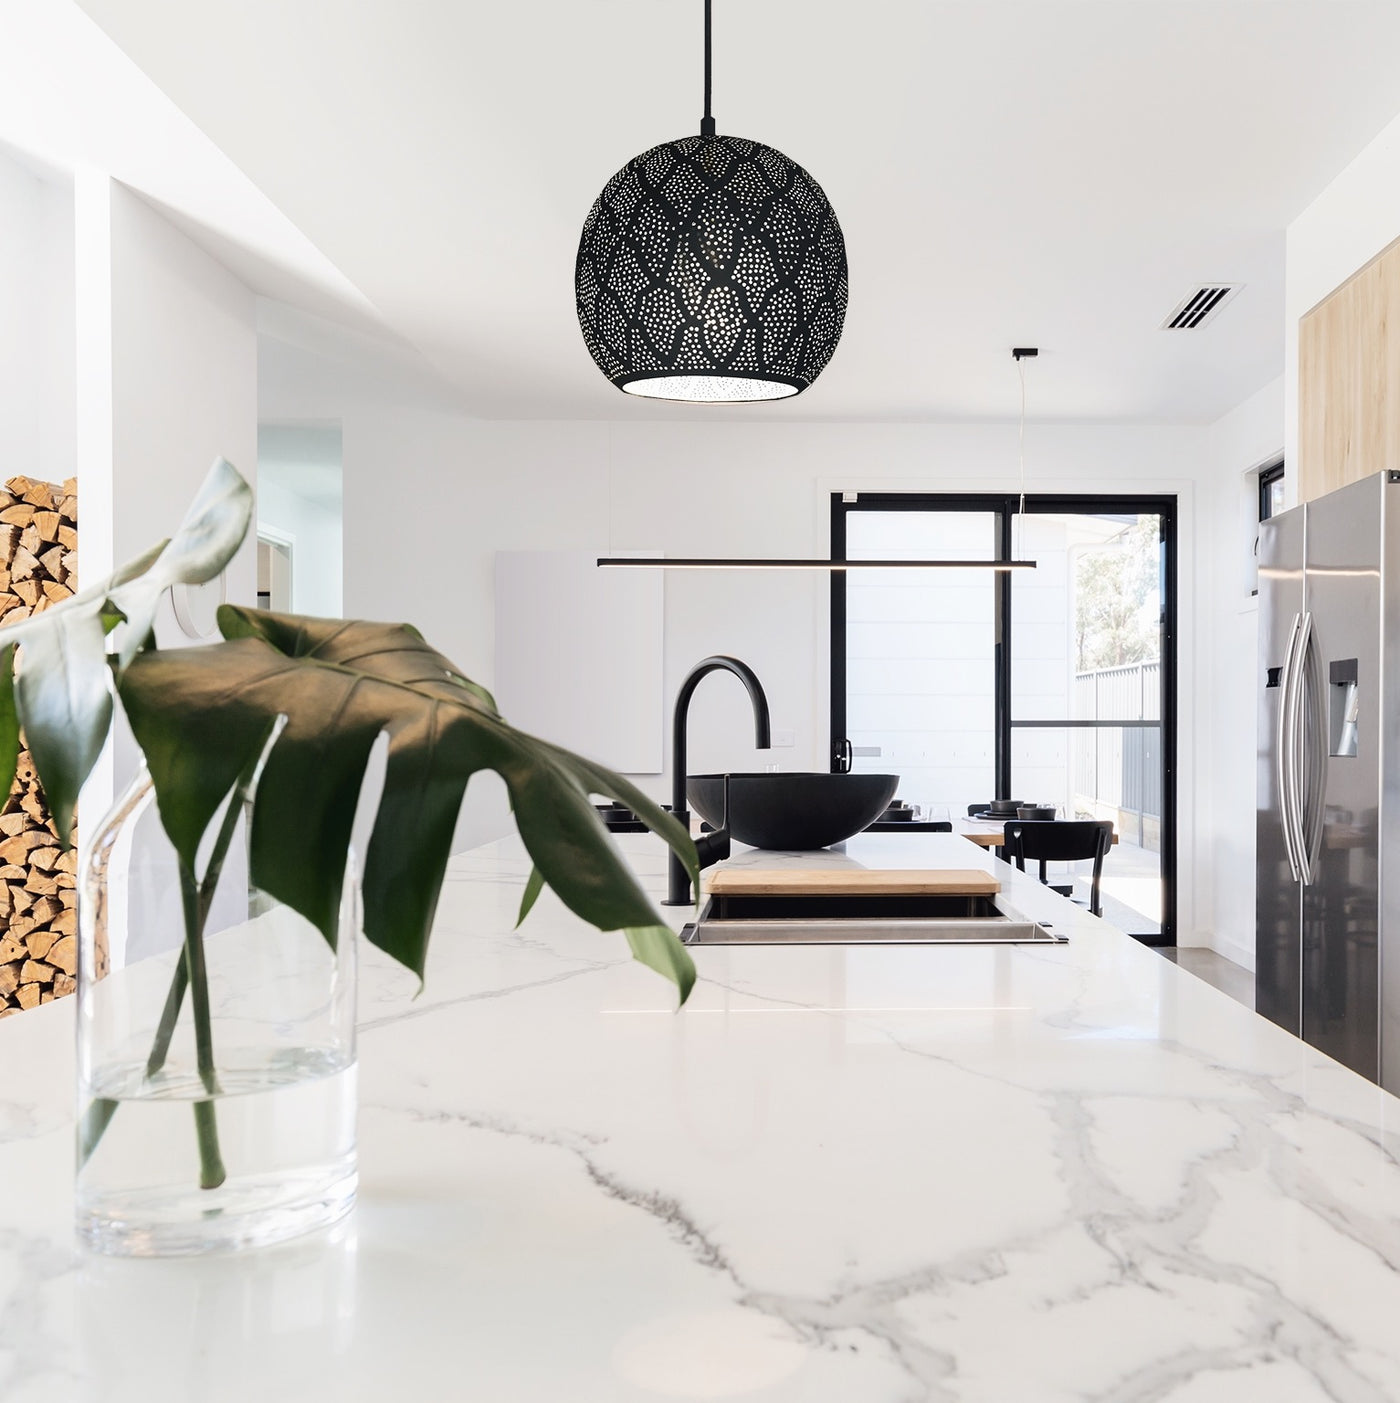 Modern kitchen with a rounded metal pendant light